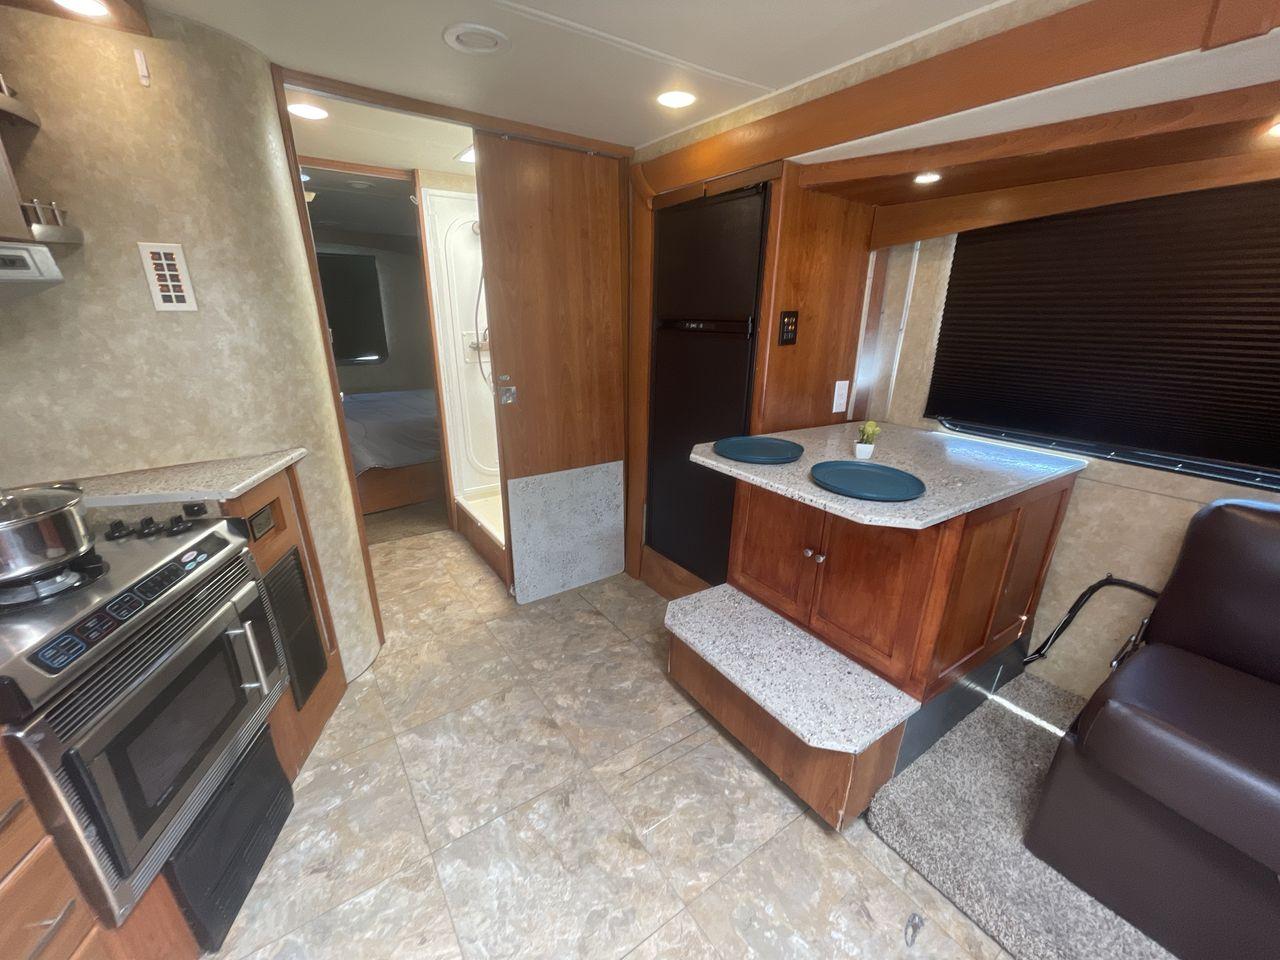 2008 TAN COACHMEN LEPRECHAUN 320DS E-450 (1FDXE45S08D) with an 6.8L V10 SOHC 20V engine, Length: 31.5 ft. | Dry Weight: 12,555 lbs. | Gross Weight: 14,500 lbs. | Slides: 2 transmission, located at 4319 N Main St, Cleburne, TX, 76033, (817) 678-5133, 32.385960, -97.391212 - Photo #12